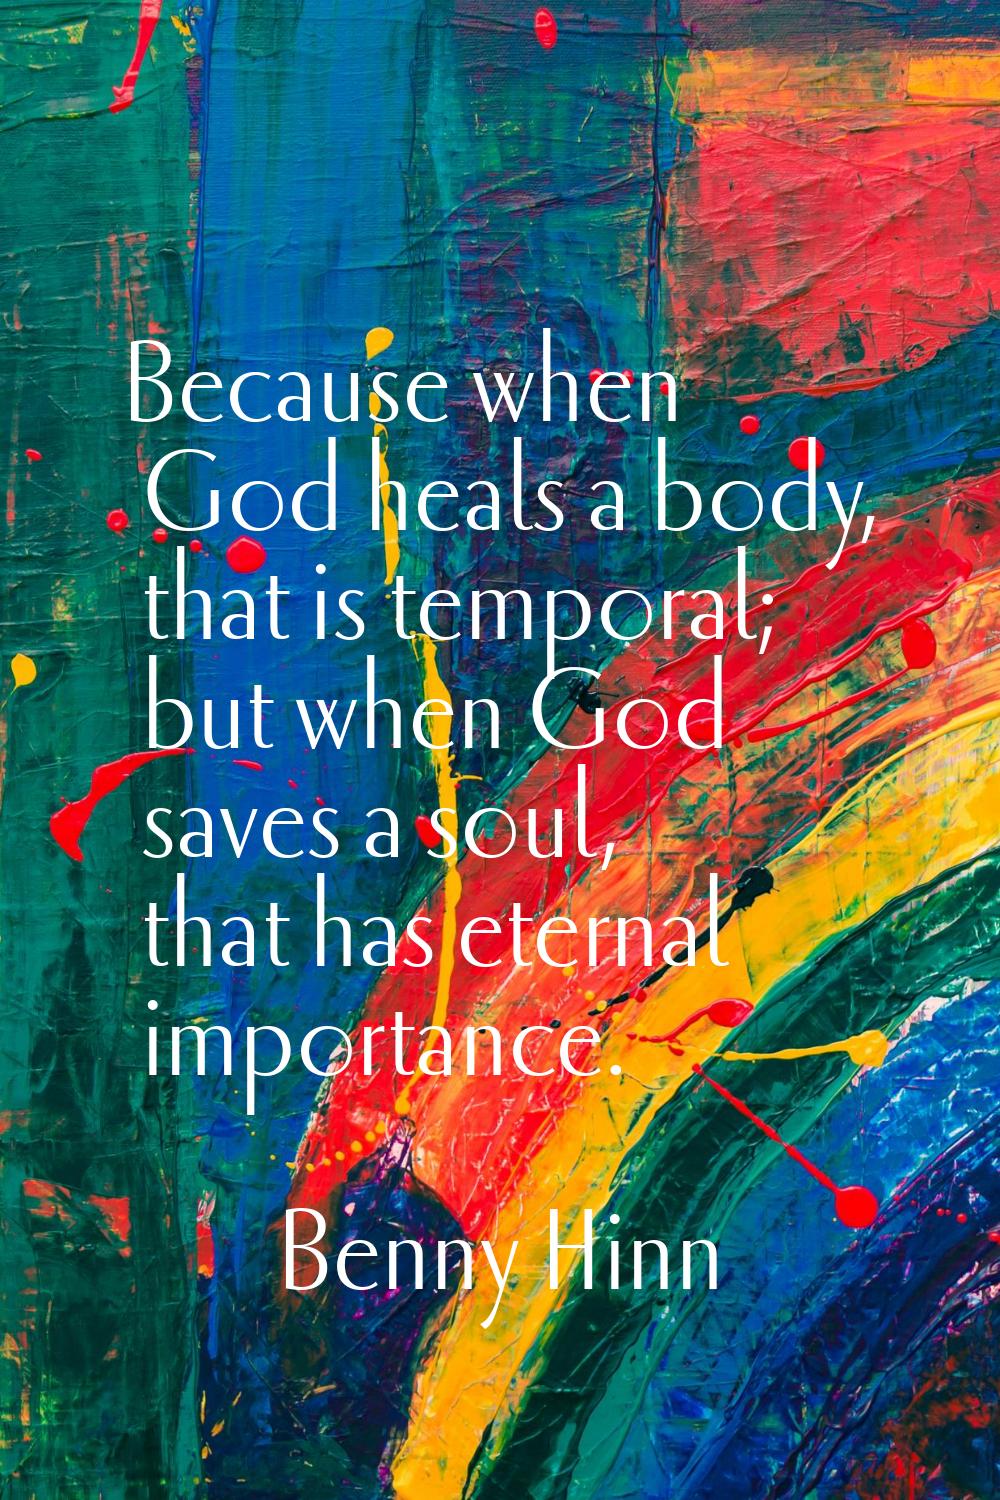 Because when God heals a body, that is temporal; but when God saves a soul, that has eternal import